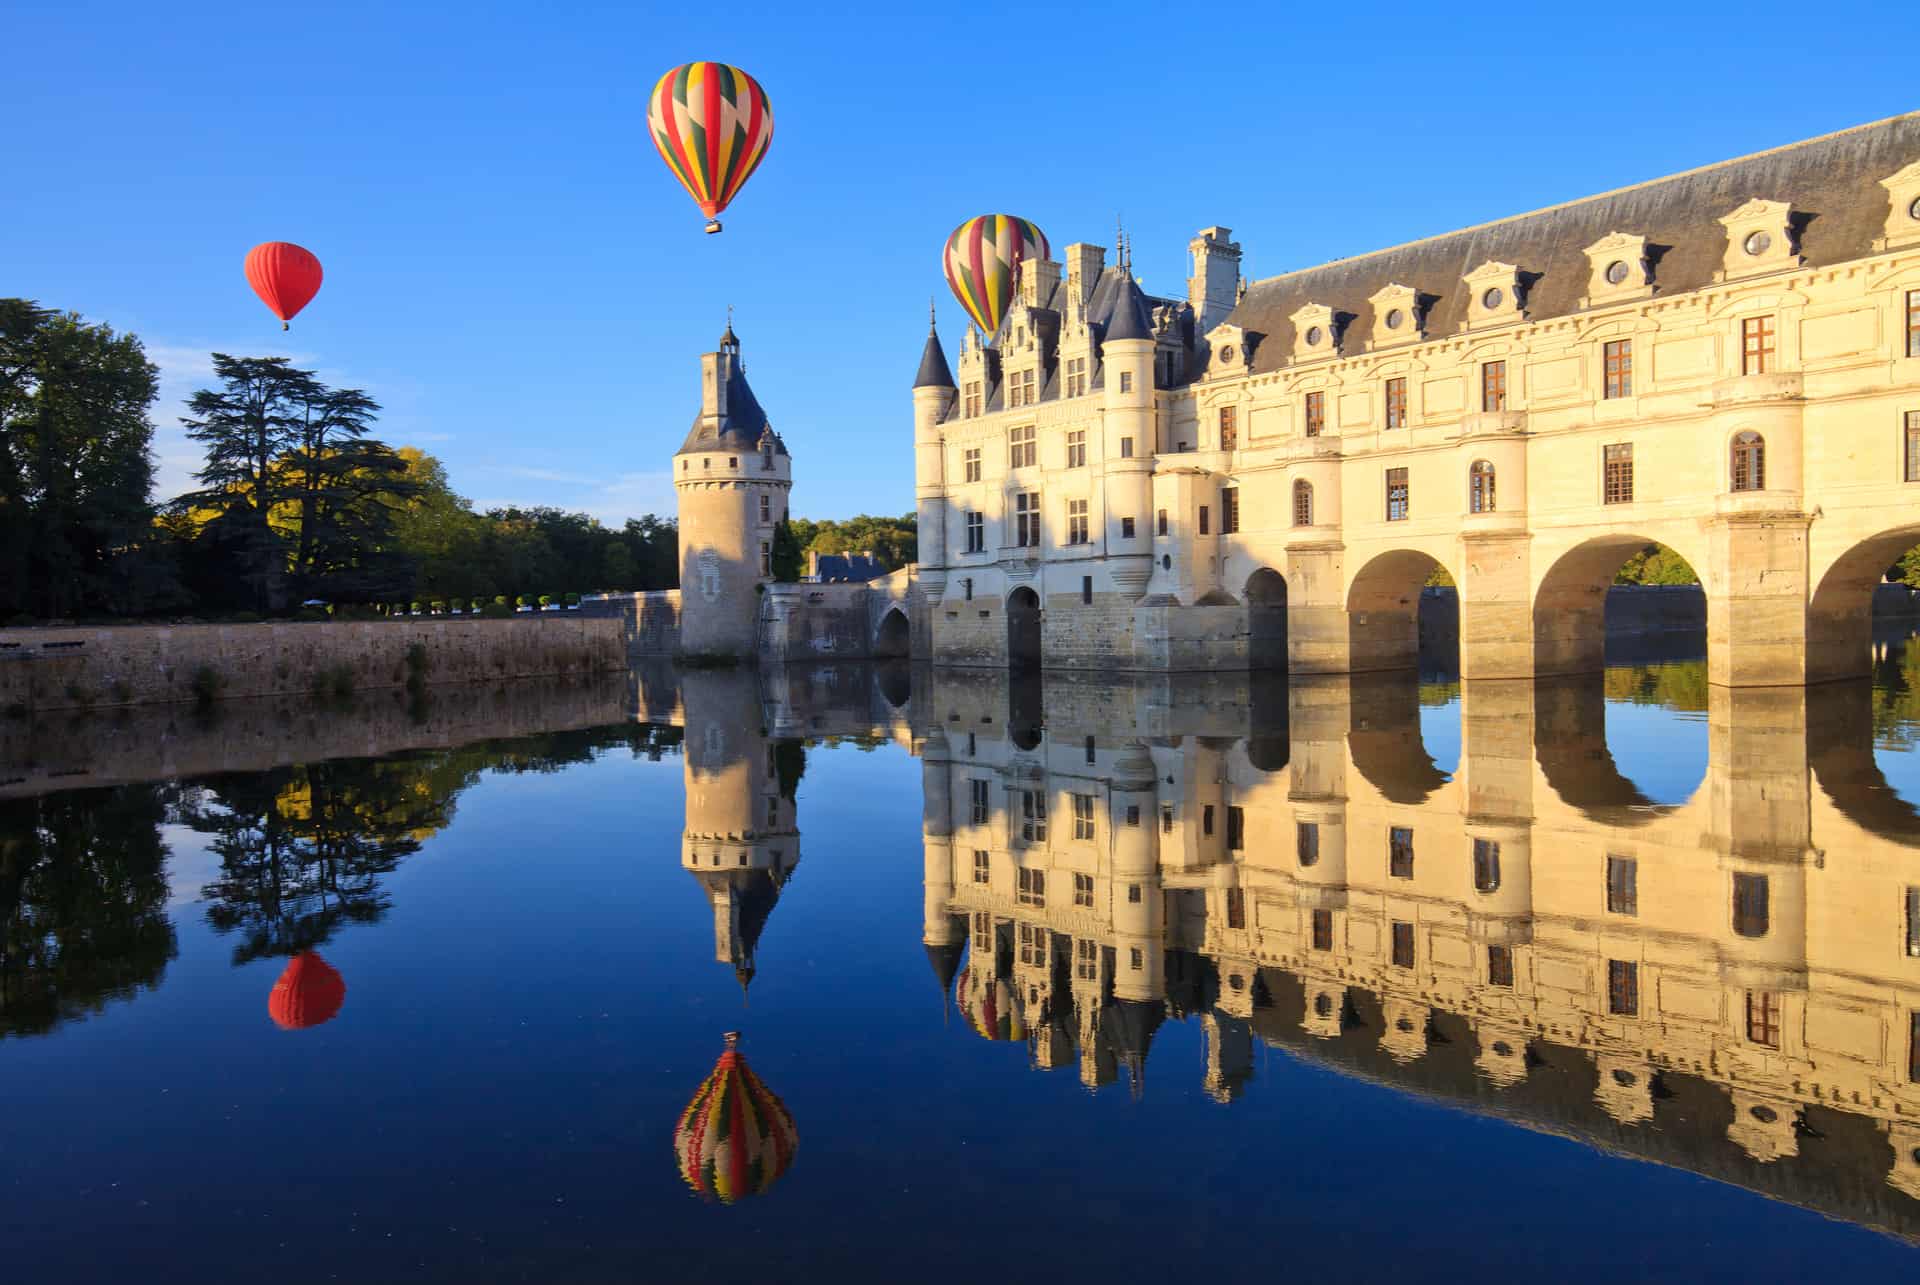 Chenonceau, one of the most beautiful castles of the Loire